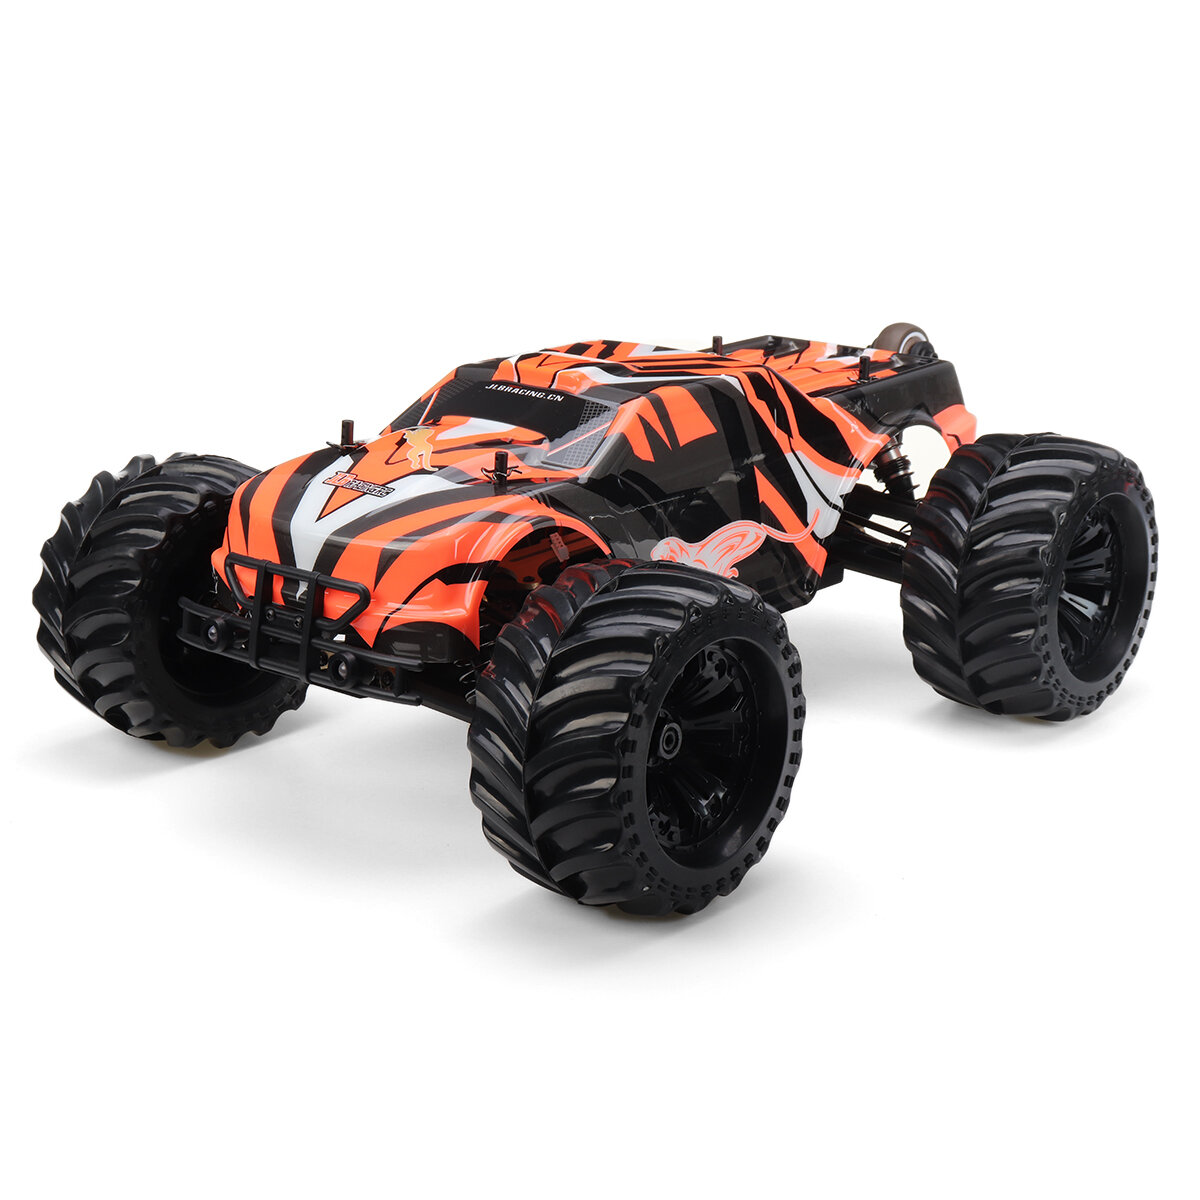 Image of JLB Racing 11101 CHEETAH 24G 1/10 Brushless RC Car 80A Waterproof Vehicle Models Truck RTR With Battery